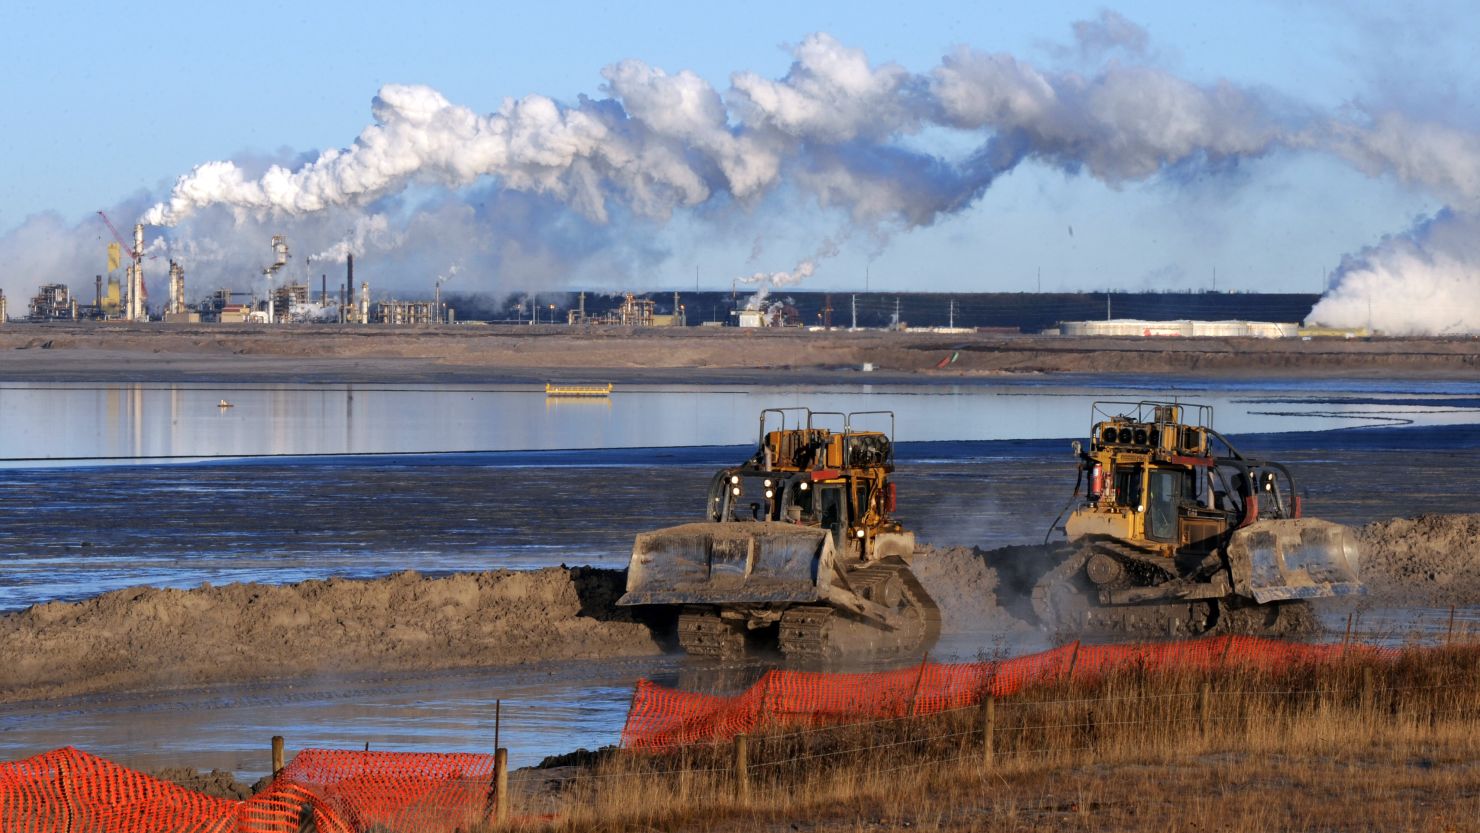 File photo of oil sands extraction facility in Alberta Province, Canada.